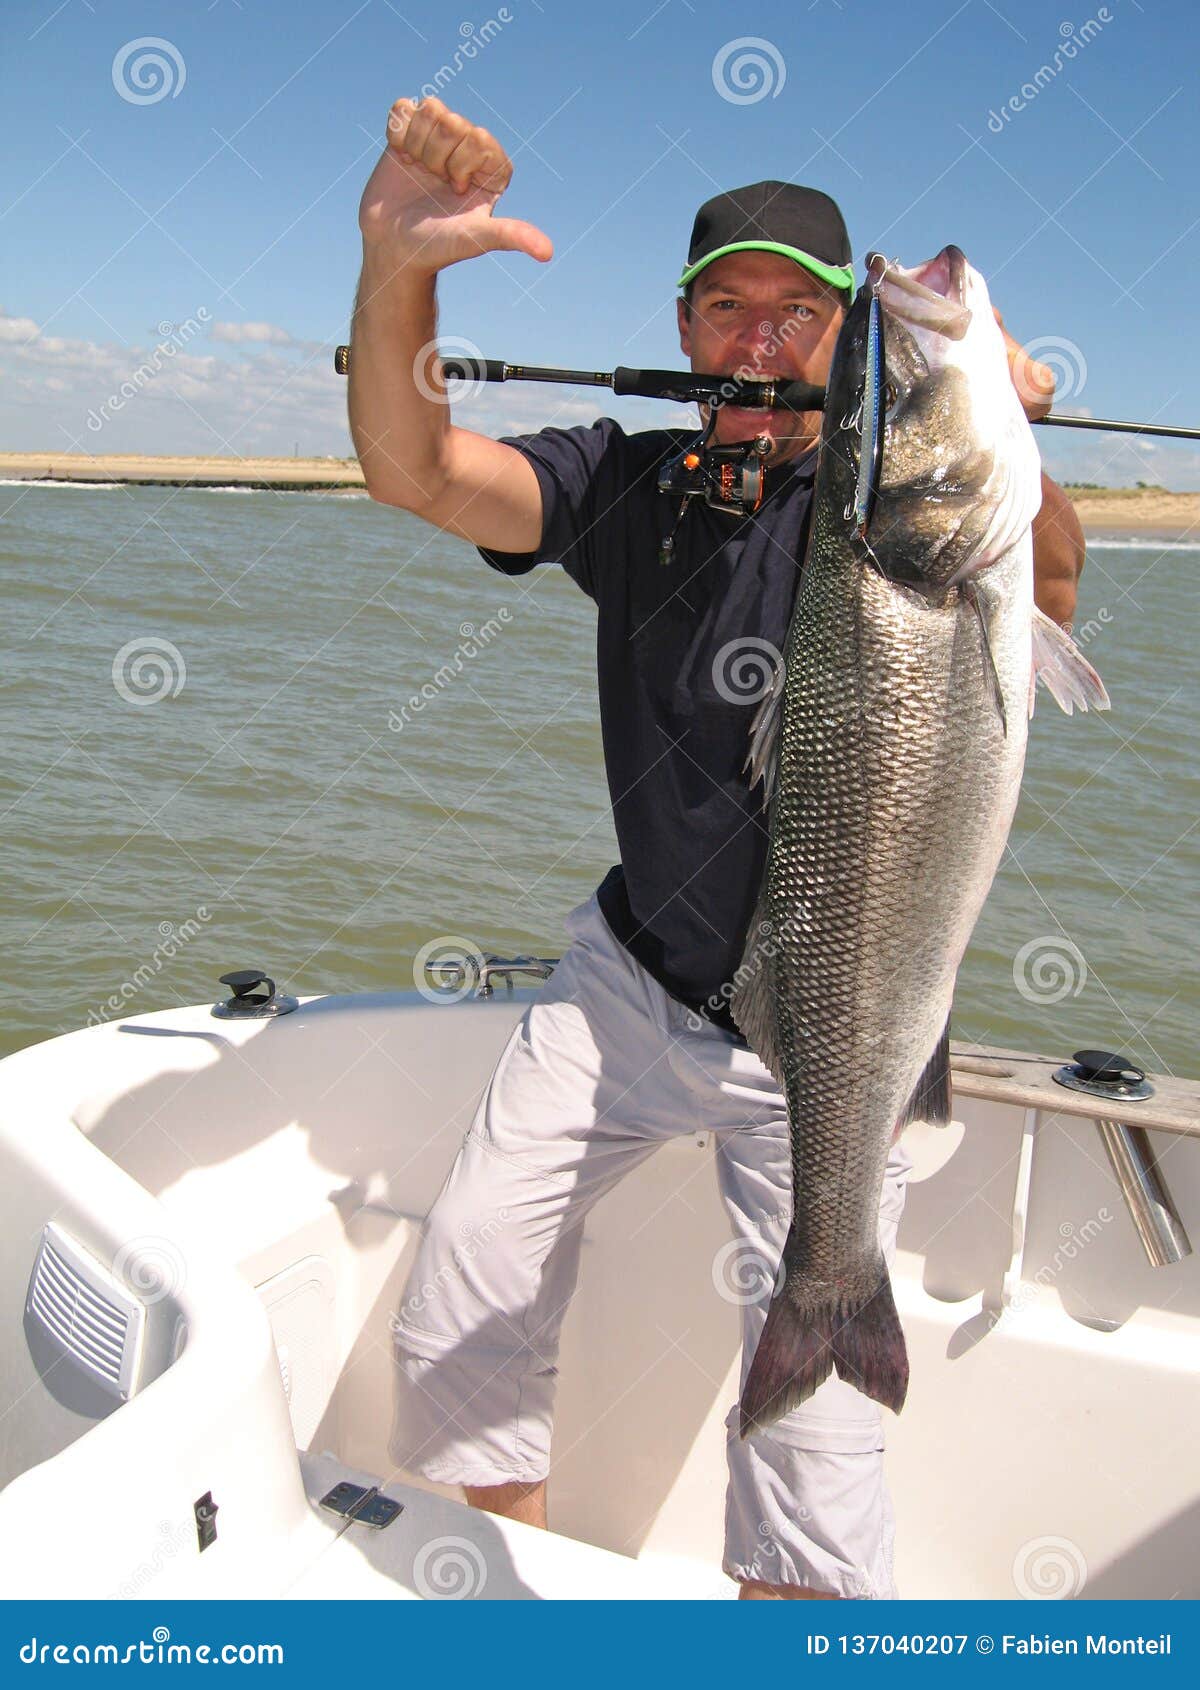 Sea Bass Fishing, Catch of Fish Stock Image - Image of smiling, pole:  137040207